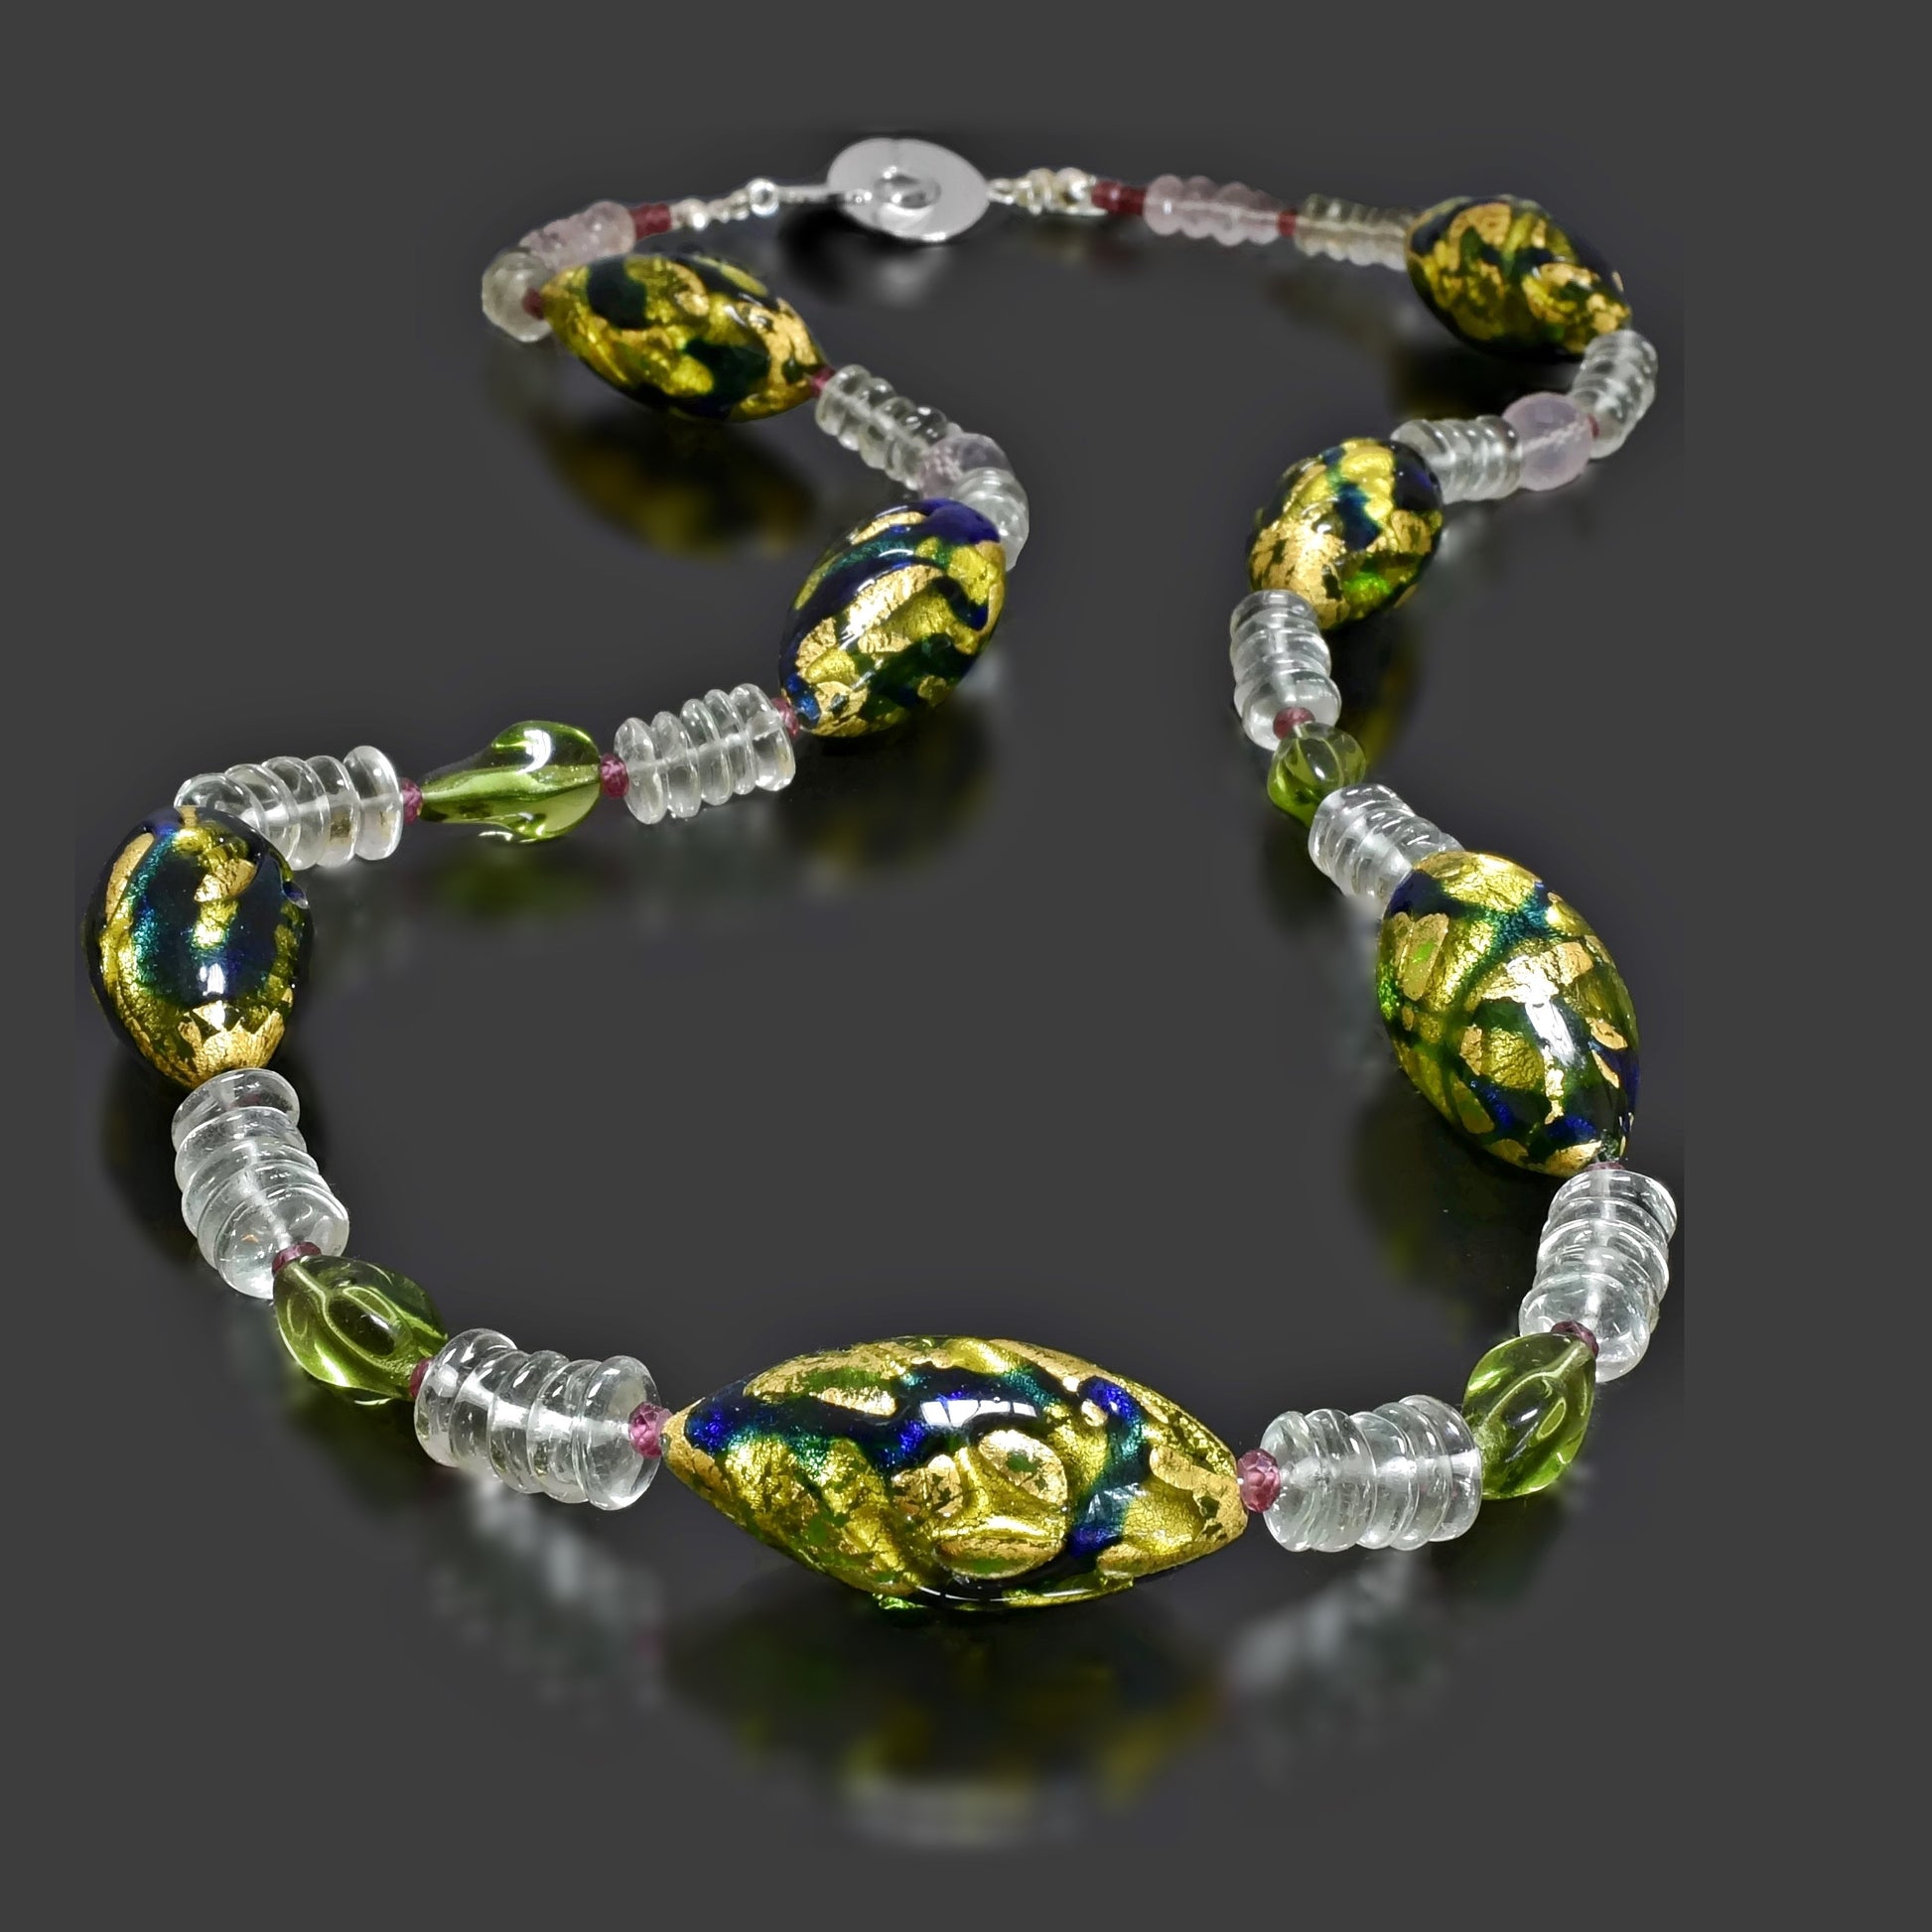 Green Large Murano Bead Statement Necklace with Green Amethyst and Garnet Sterling Silver 